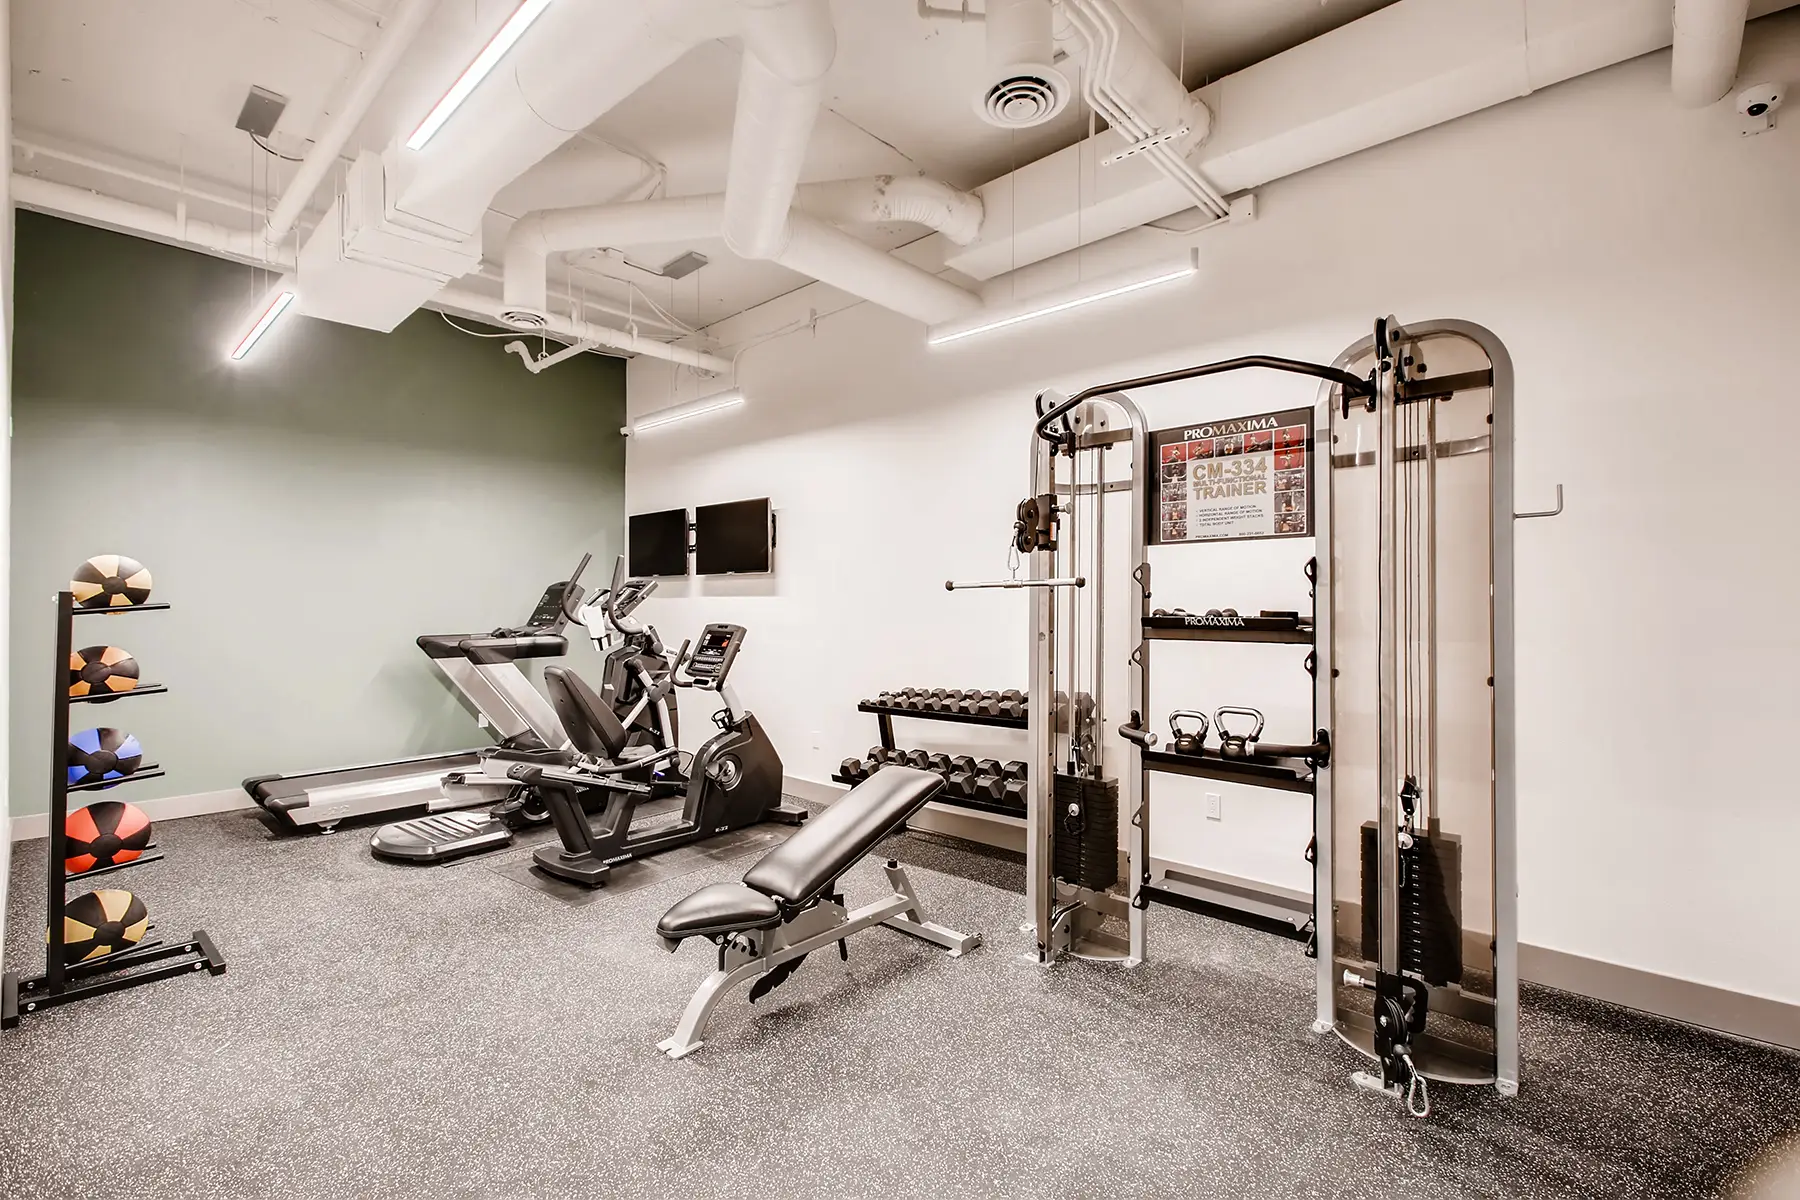 Fitness center with cario equipment, free weights, and multi cable station